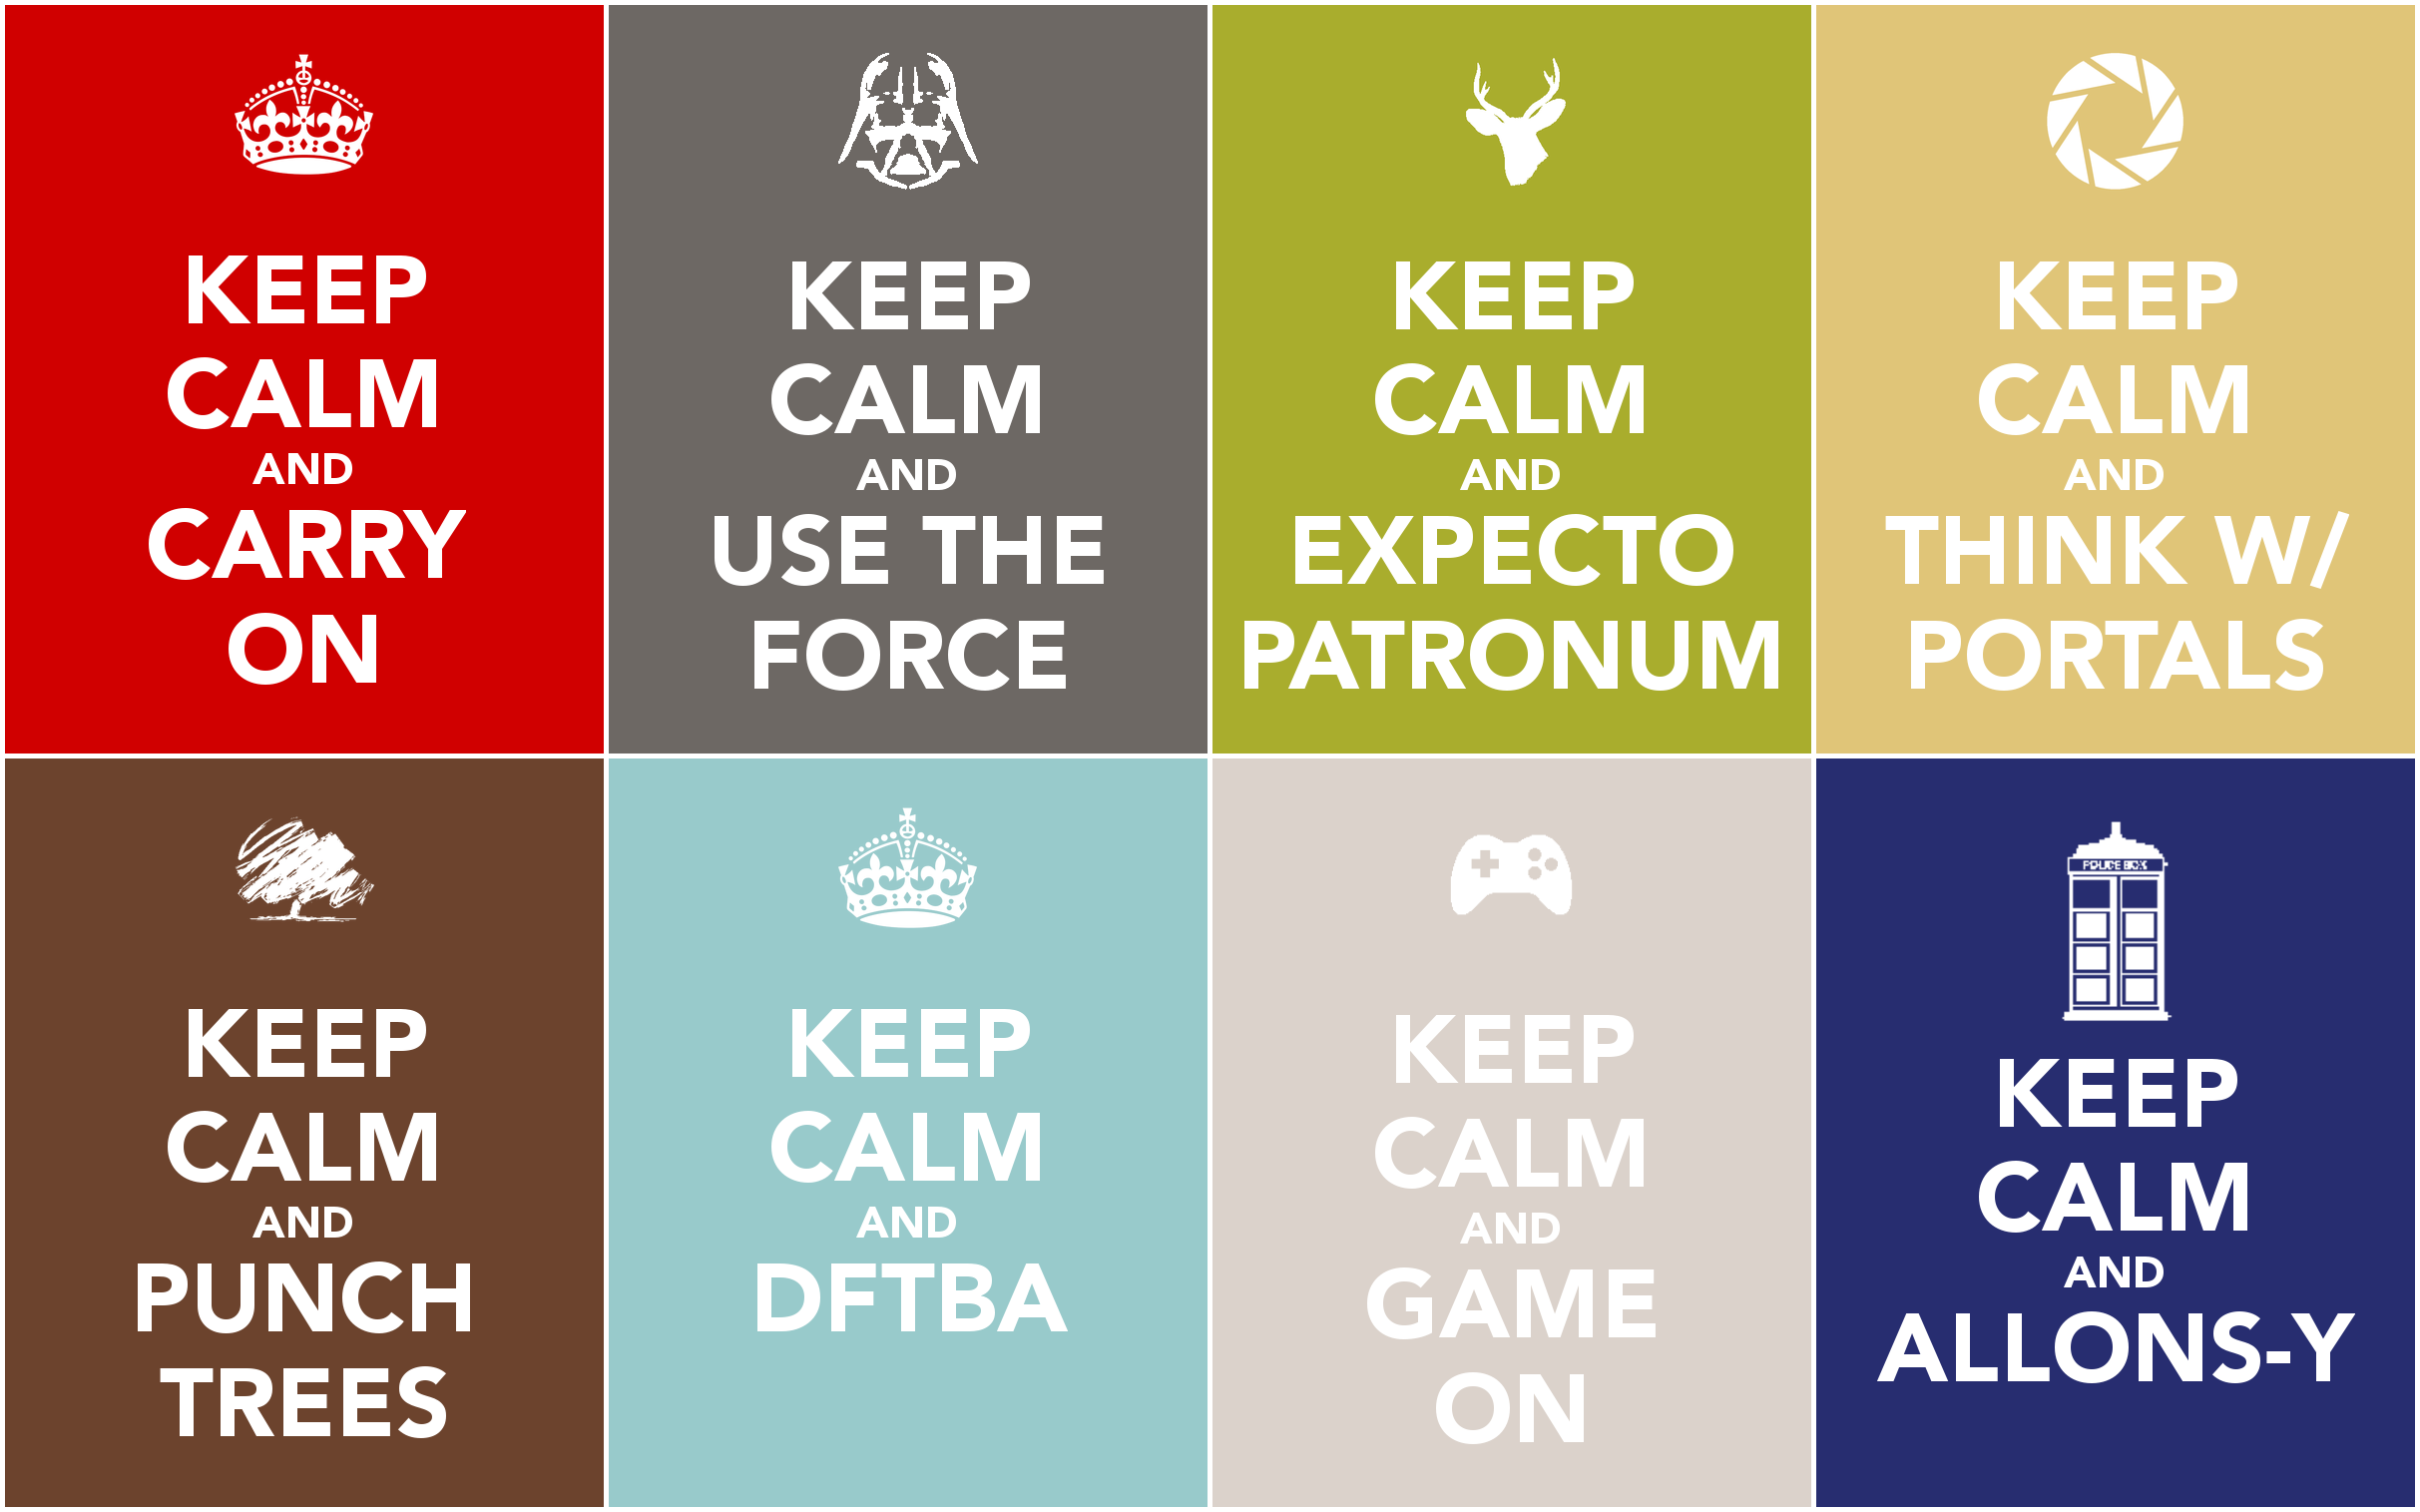 Keep Calm and Roll dice. Keep Calm and Meditate. Keep Calm and use the Force. Keep Calm and Expecto Patronum. Keep posted